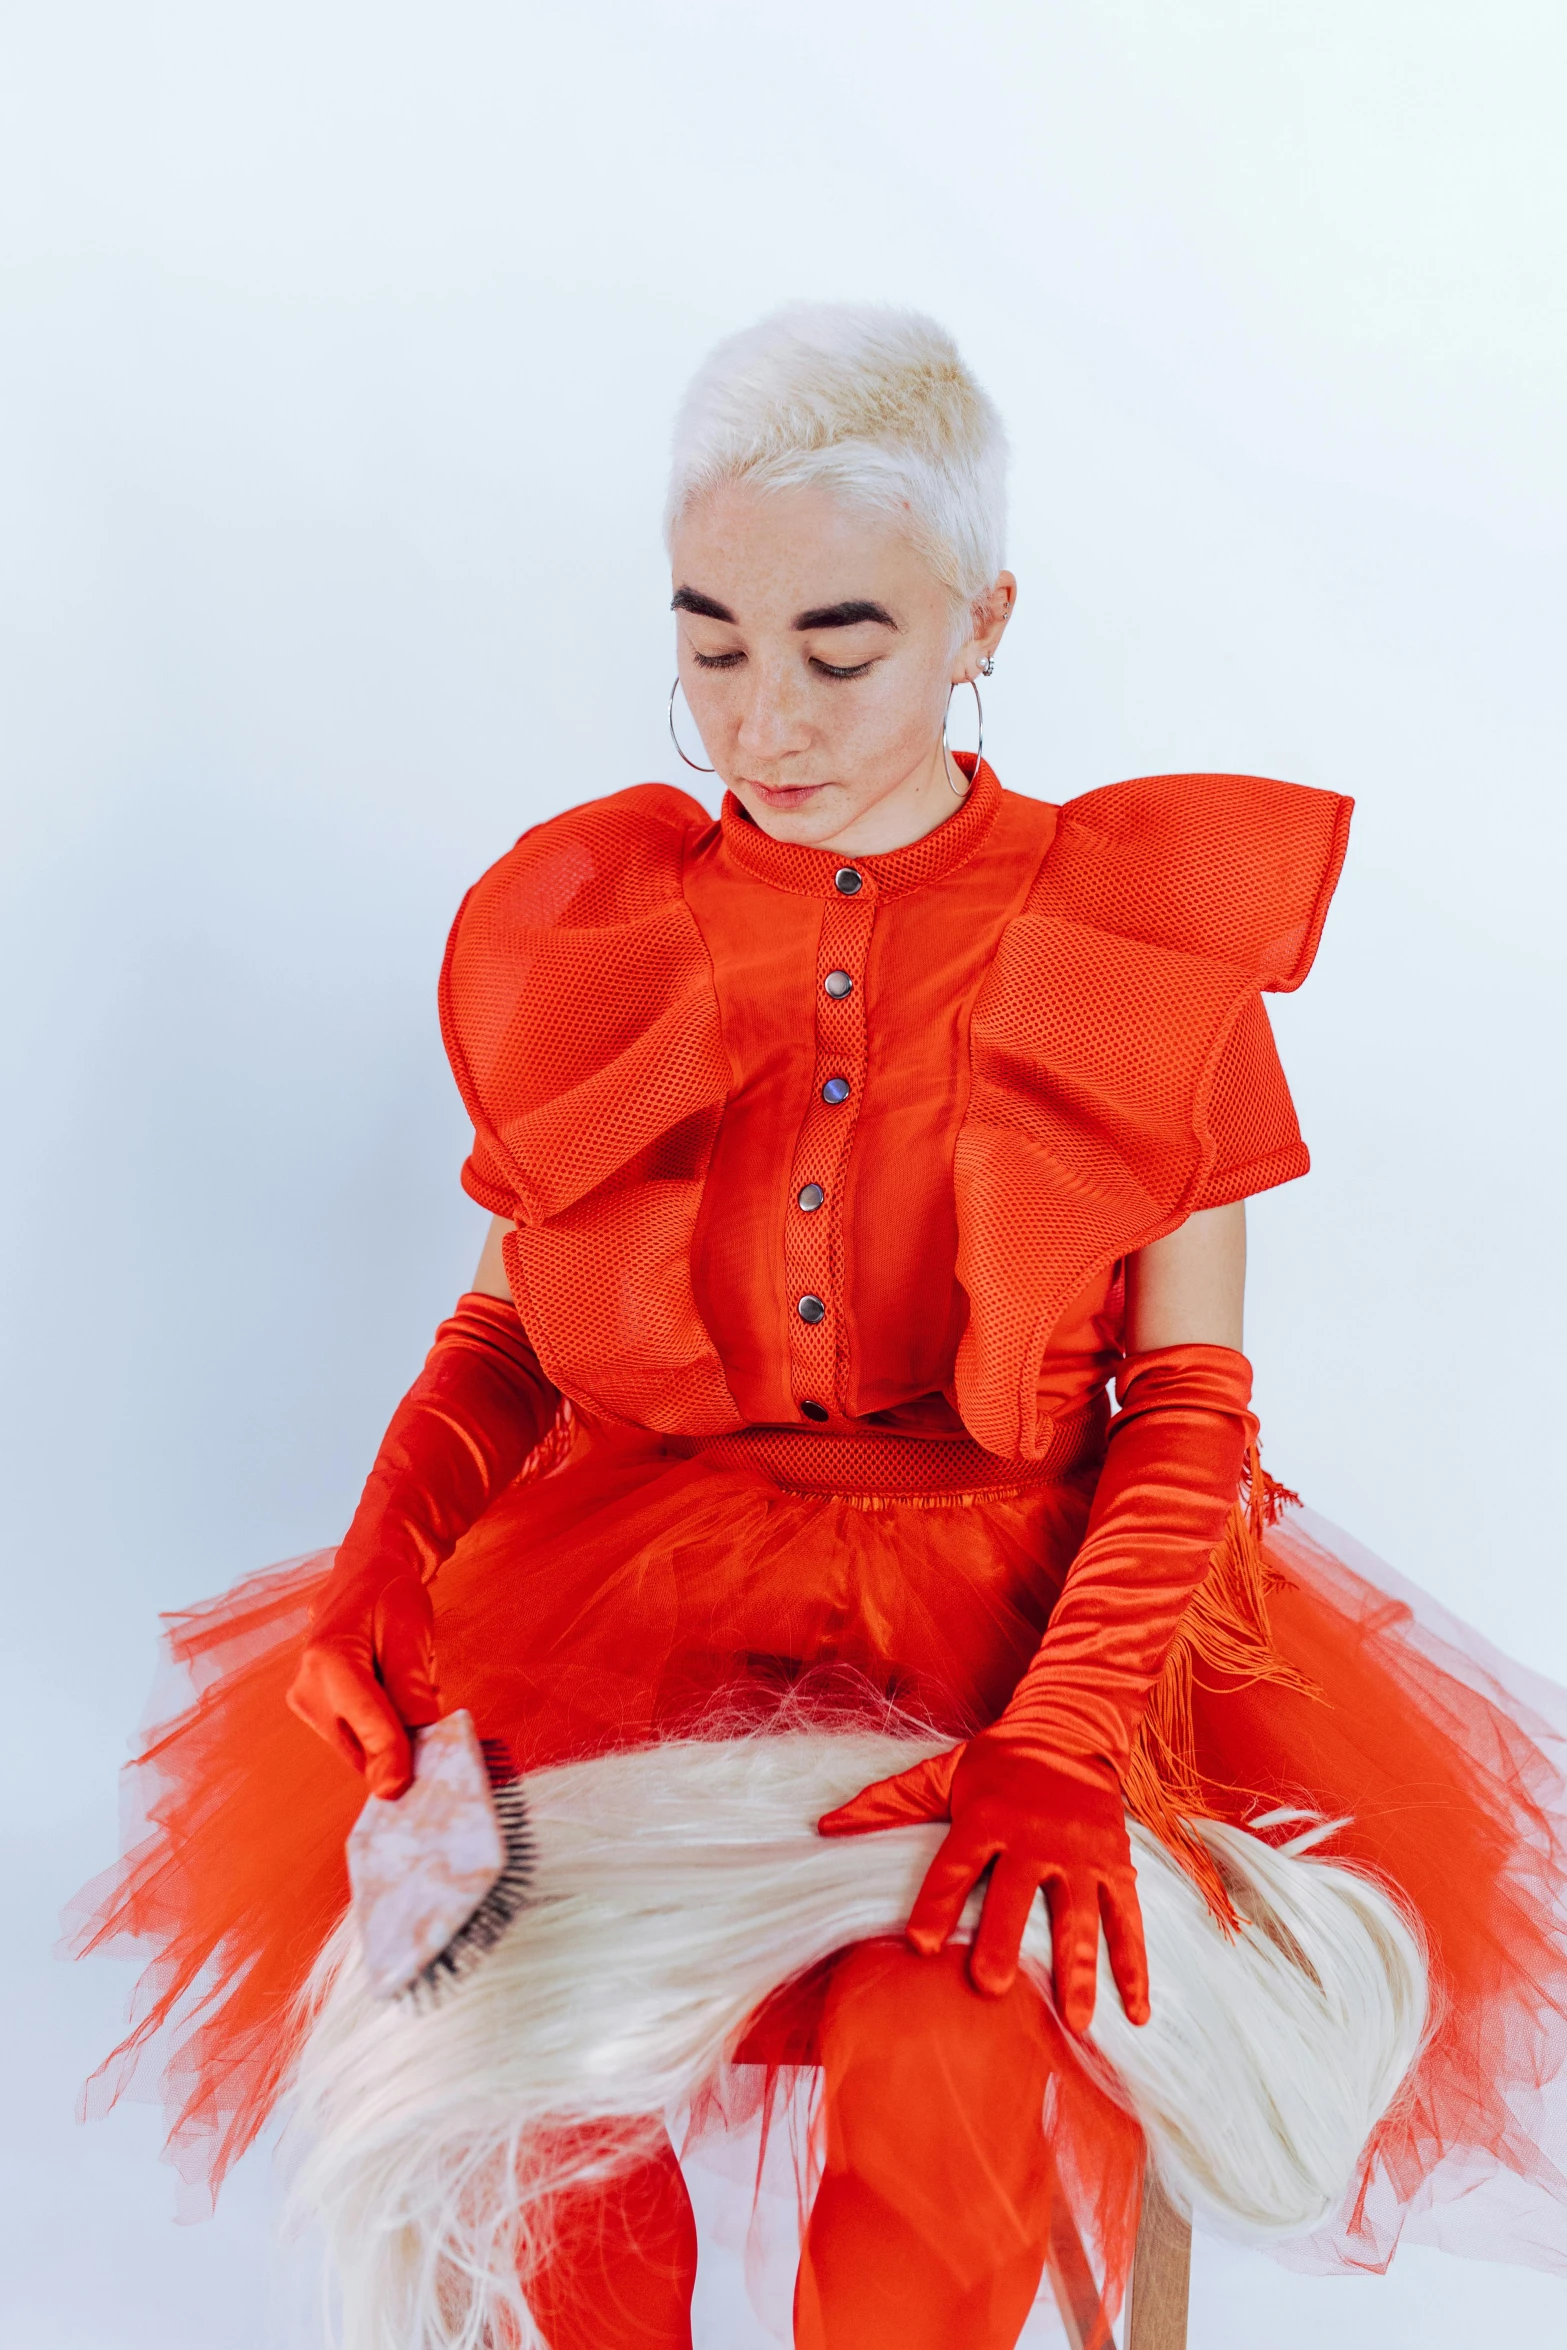 a woman in a red dress sitting on a stool, an album cover, inspired by Marie-Gabrielle Capet, fluffy orange skin, rei kawakubo artwork, an epic non - binary model, red gloves